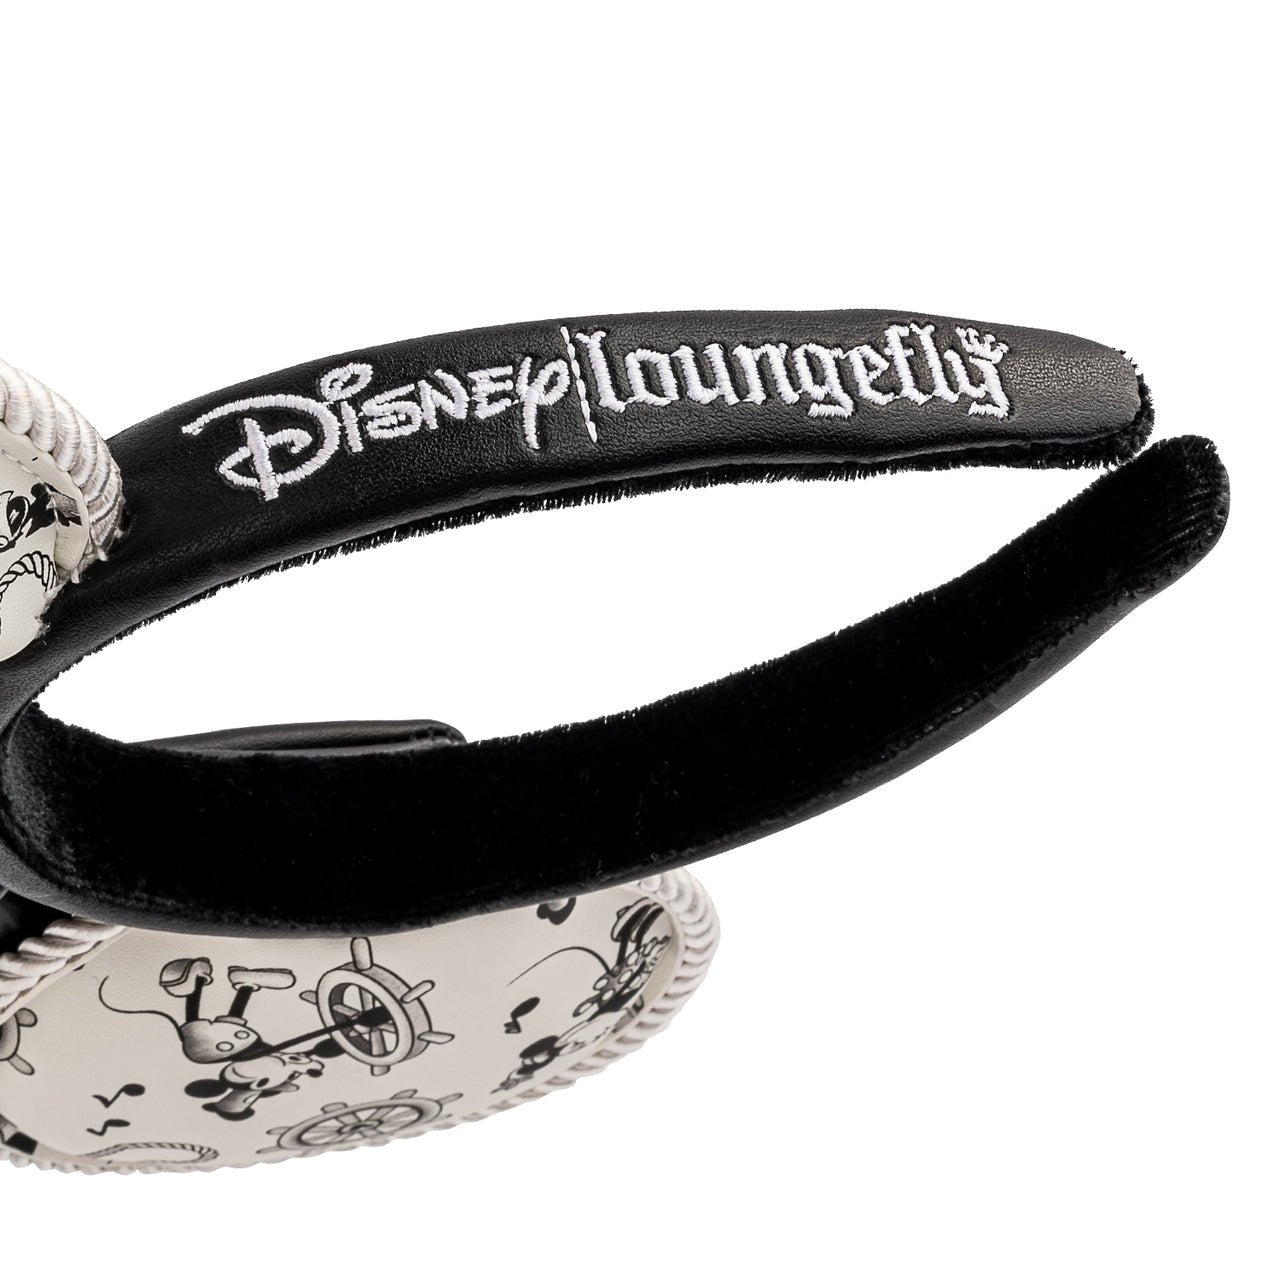 Loungefly x Disney Steamboat Willie Bow Headband - GeekCore